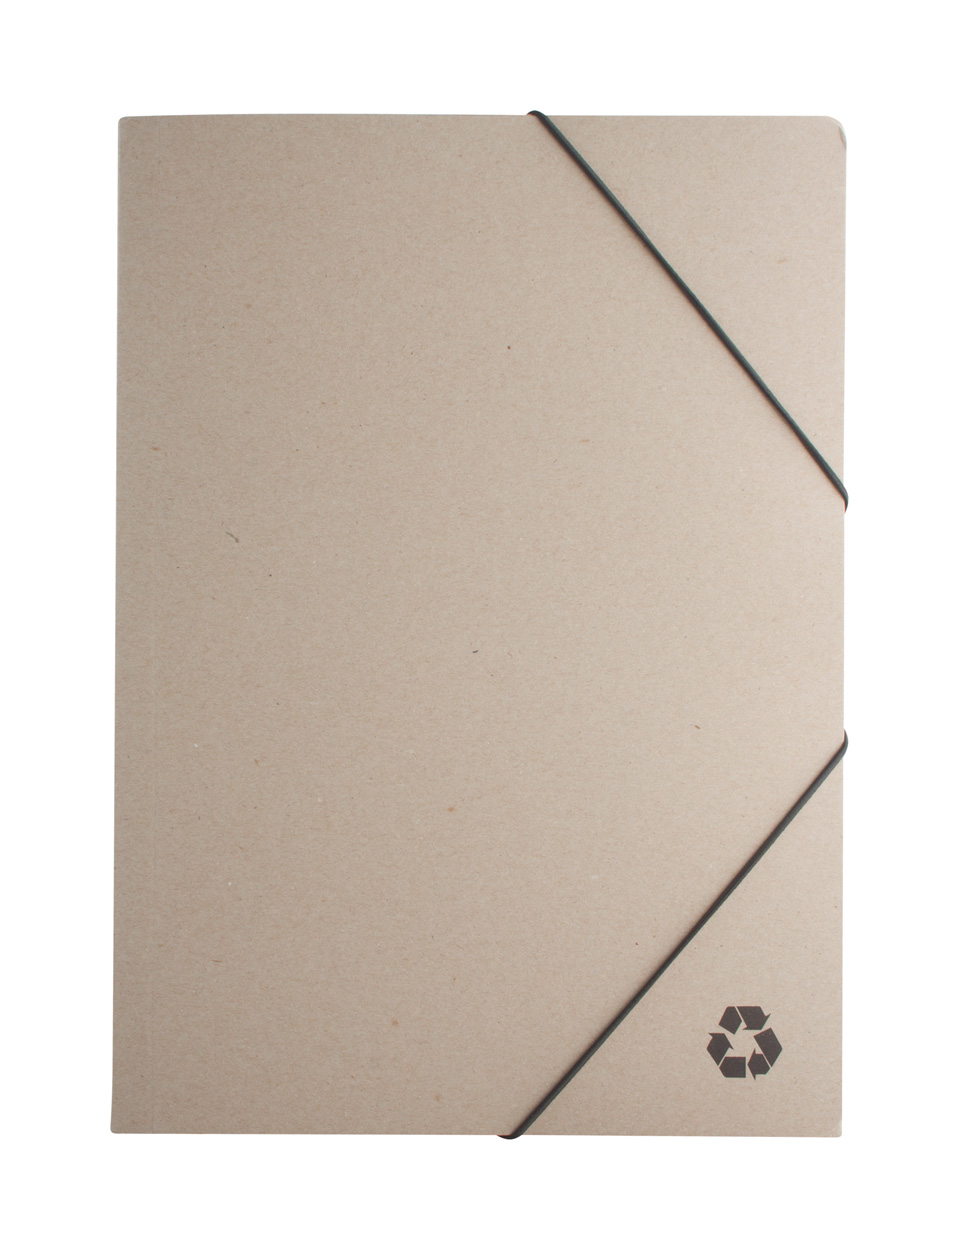 Paper document folders ECOLOGICAL made of recycled paper - natural